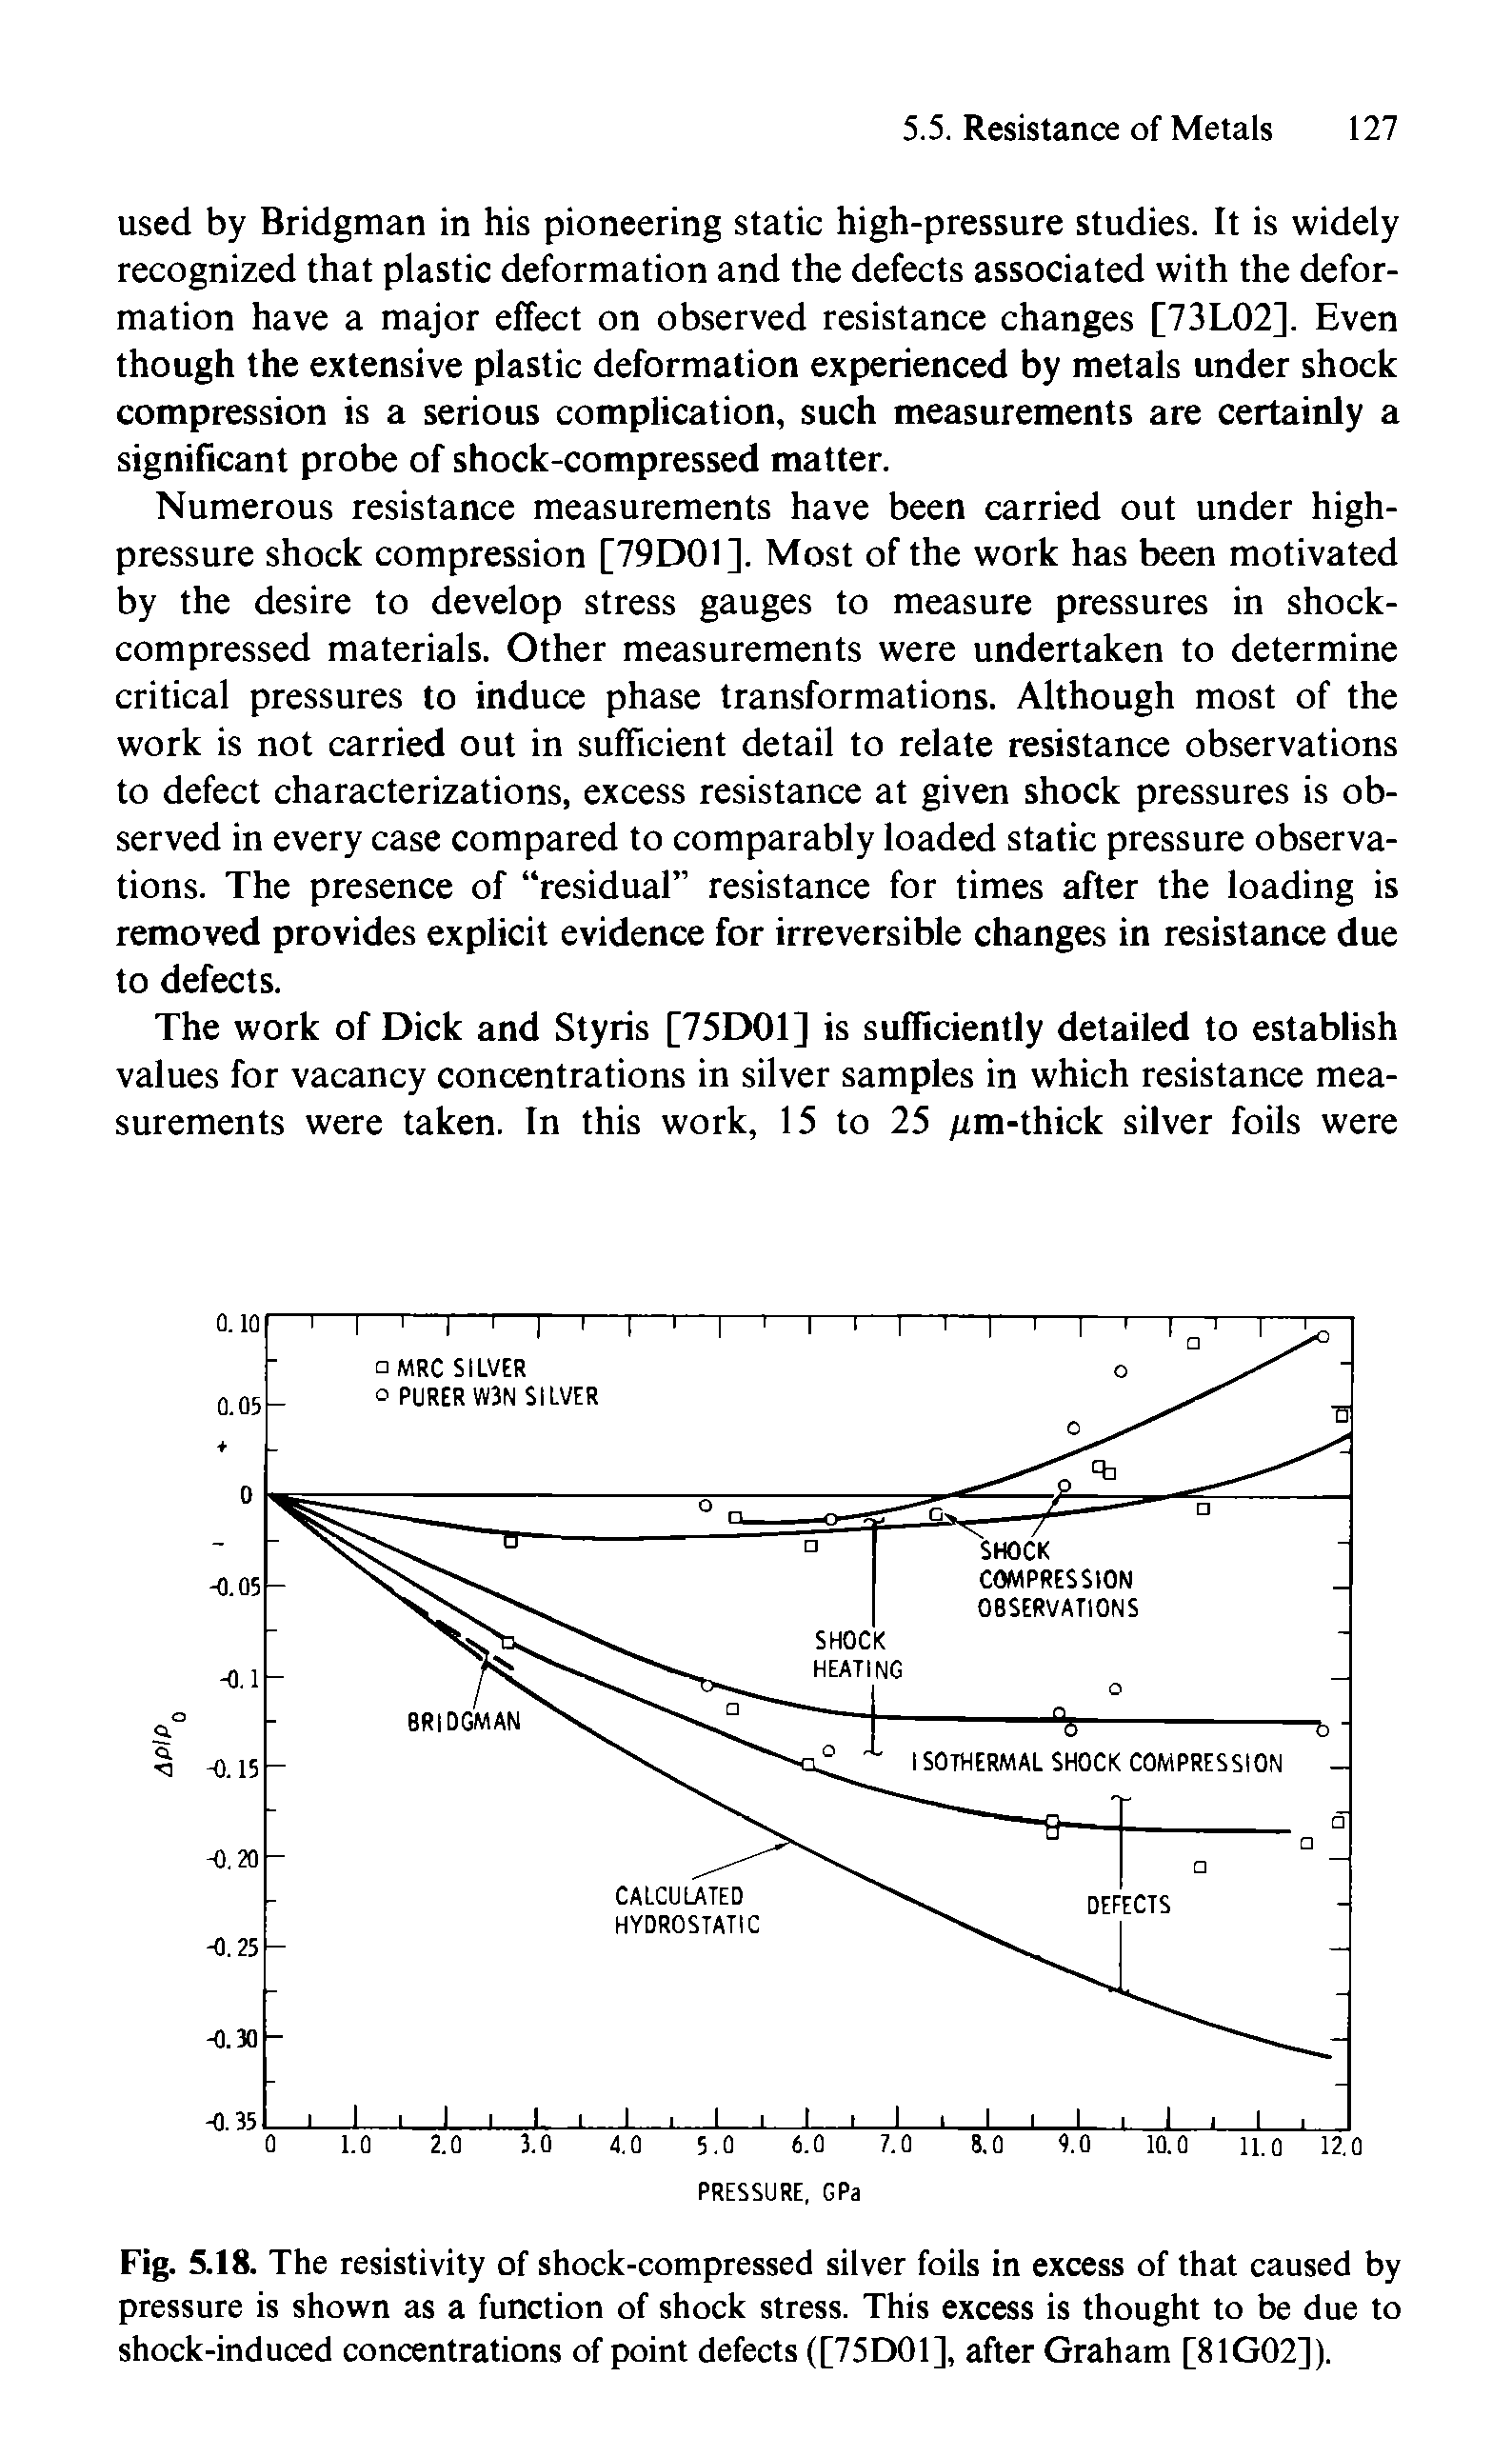 Fig. 5.18. The resistivity of shock-compressed silver foils in excess of that caused by pressure is shown as a function of shock stress. This excess is thought to be due to shock-induced concentrations of point defects ([75D01], after Graham [81G02]).